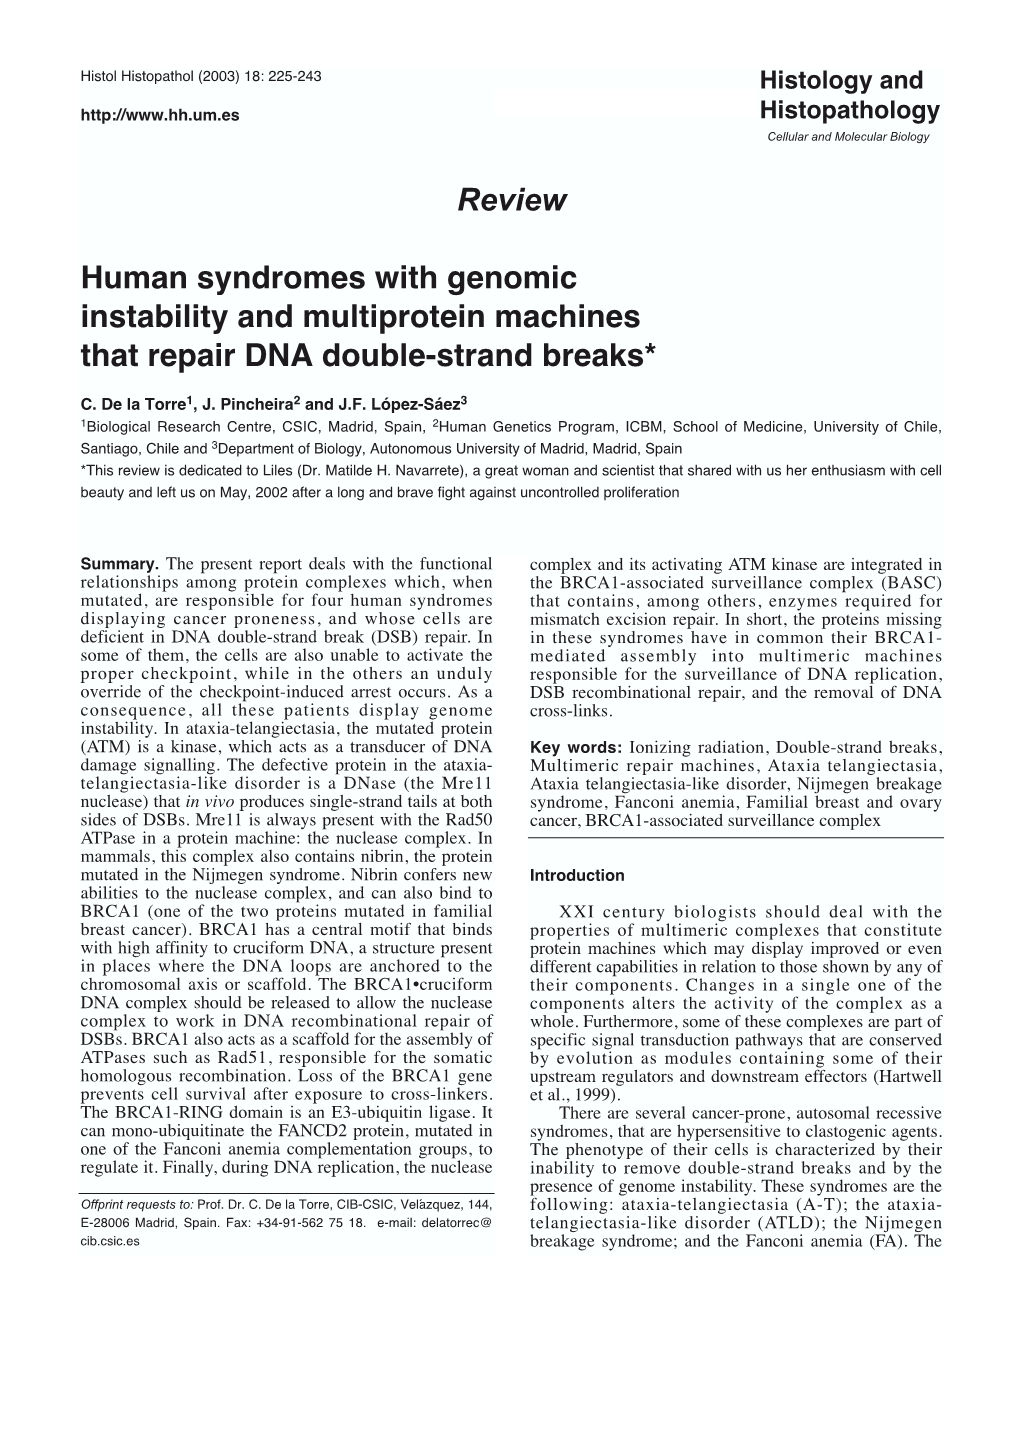 Review Human Syndromes with Genomic Instability and Multiprotein